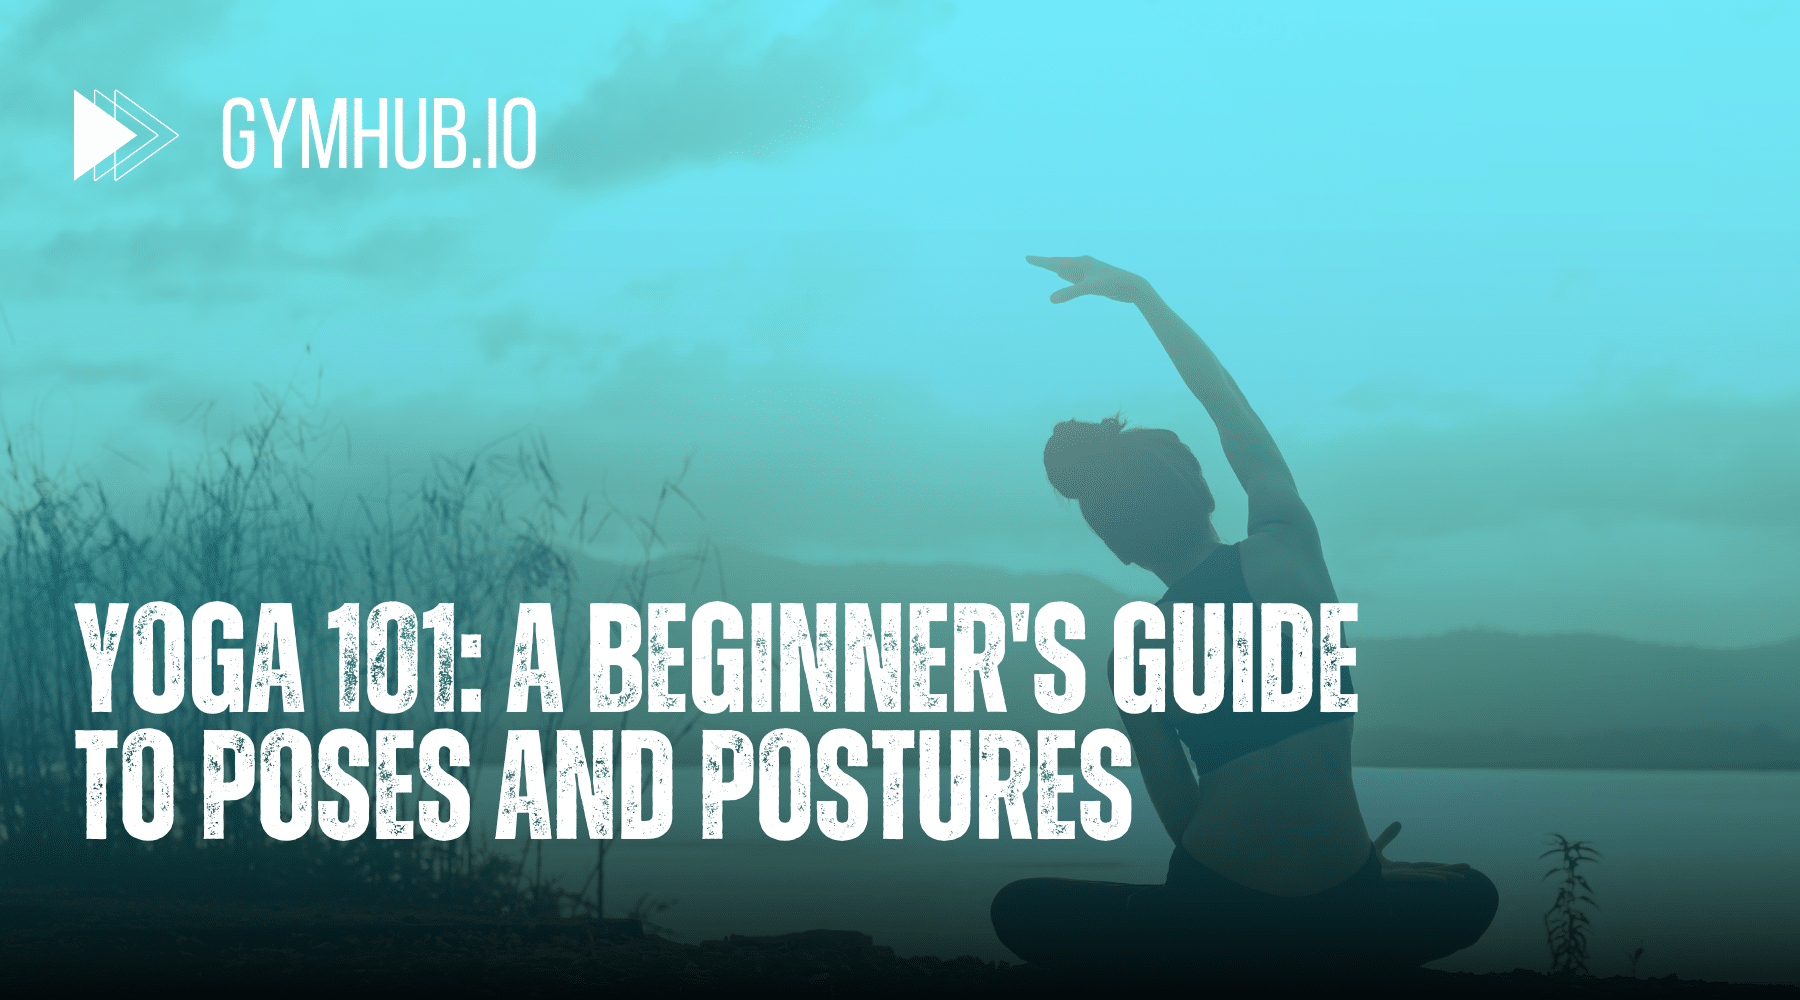 Yoga 101: A Beginner's Guide to Poses and Postures